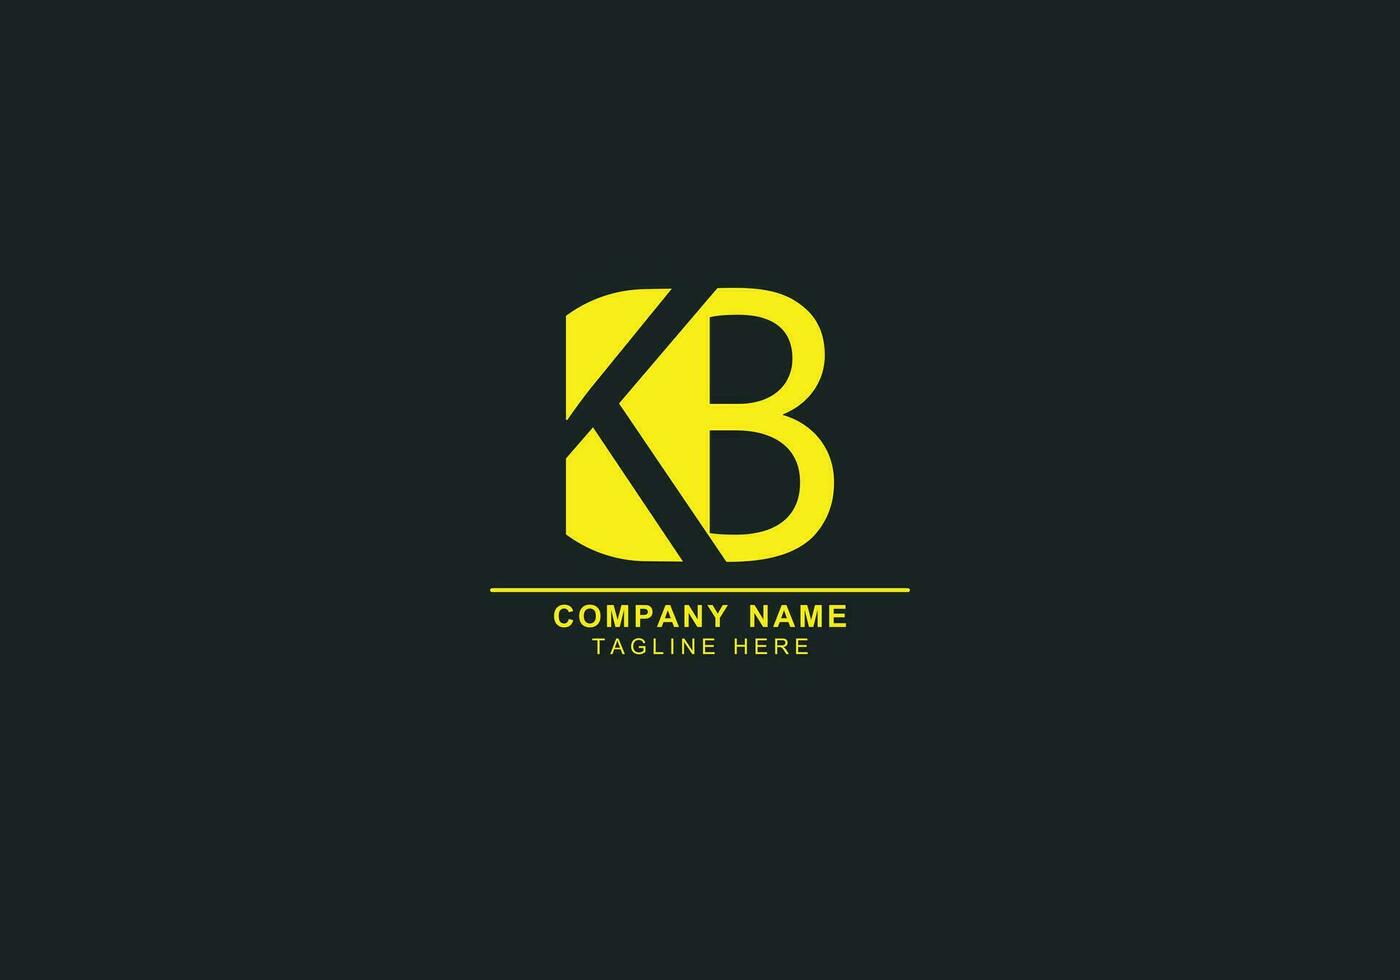 Initial Letter KB or BK minimal and negative space logo vector